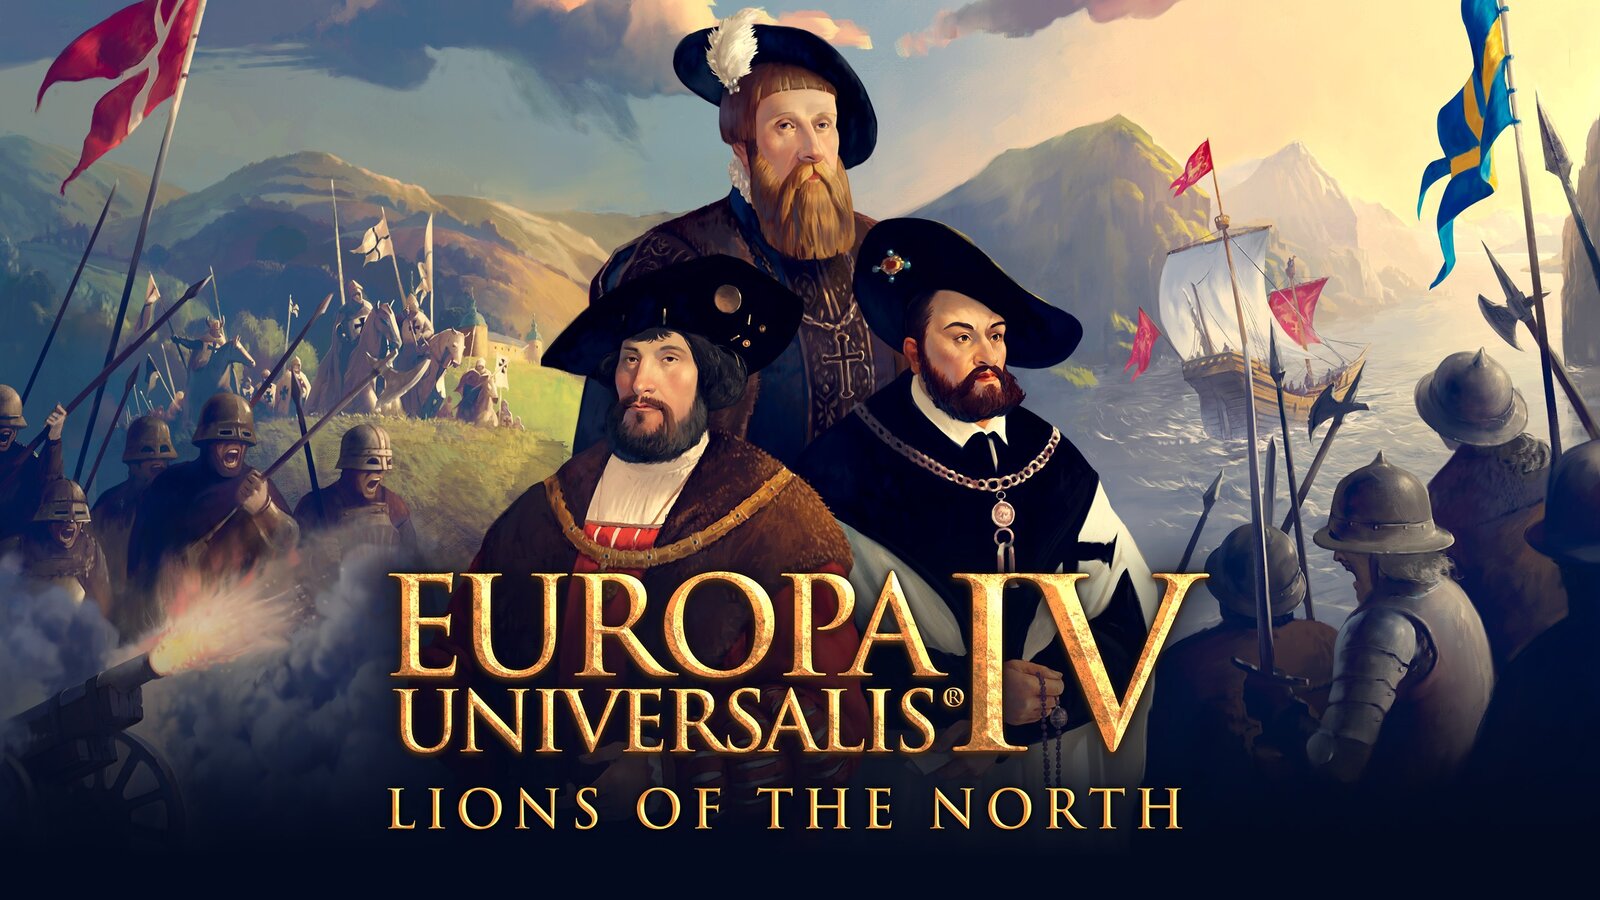 Europa Universalis IV: Lions of the North